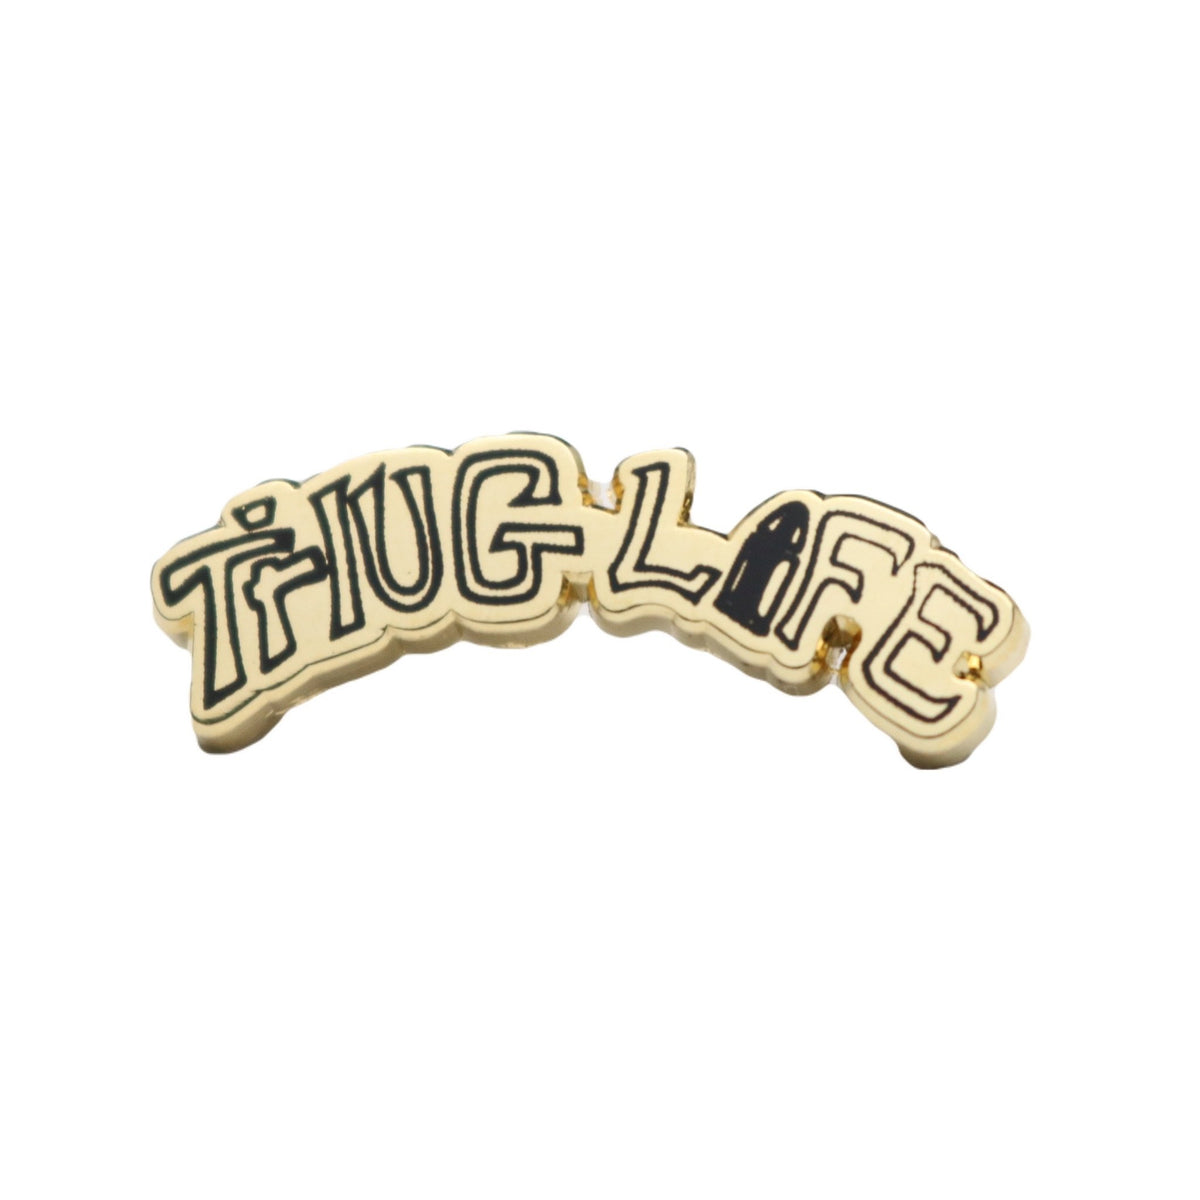 Thug Life Tattoo Script Iron On Embroidered Patch  eBay